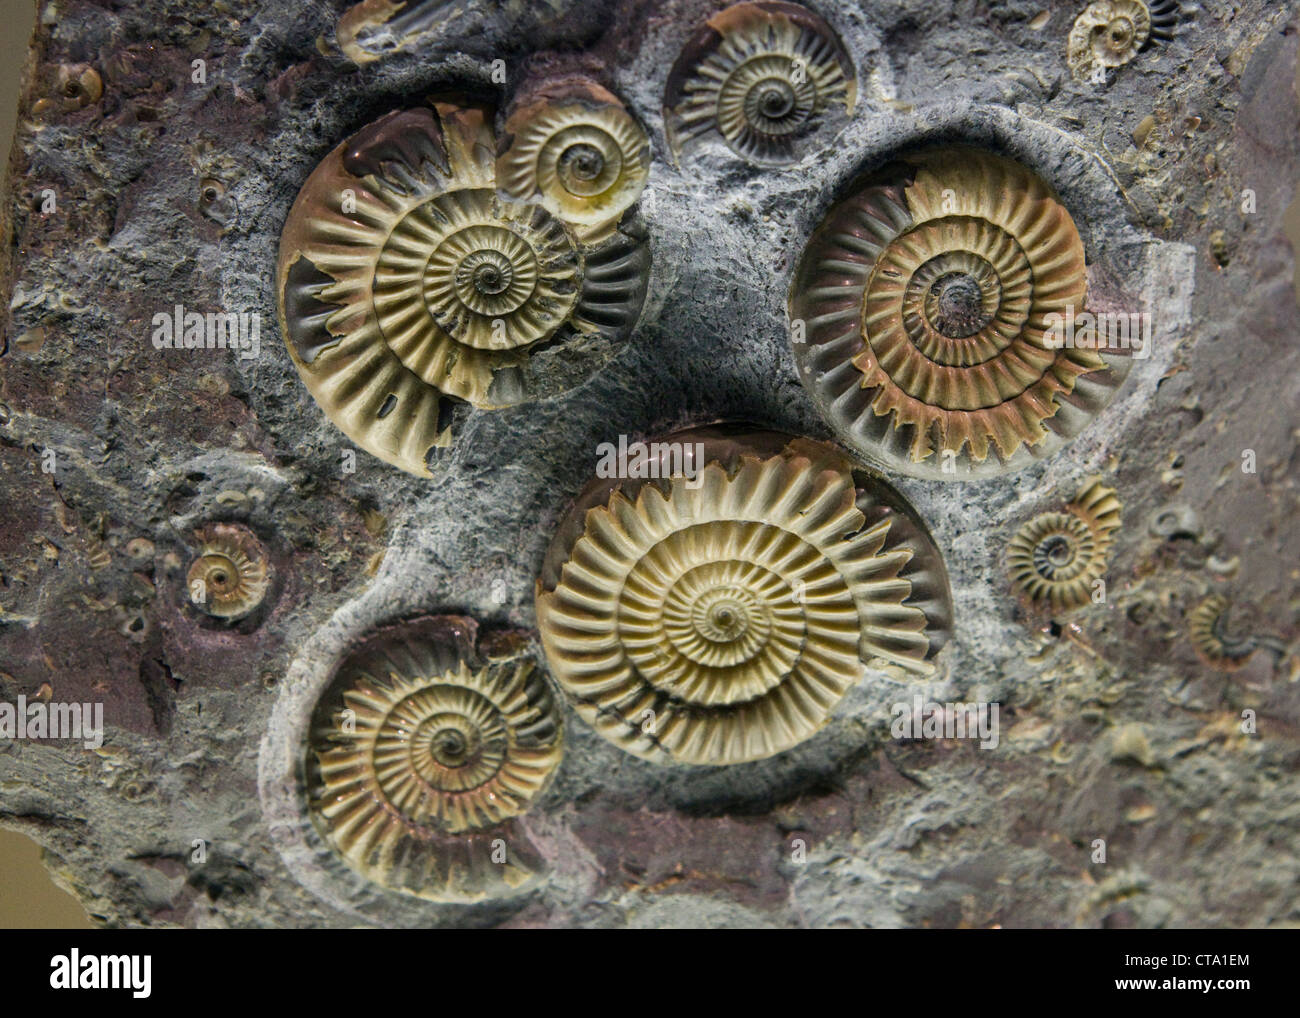 Fossiles d'Ammonites Banque D'Images